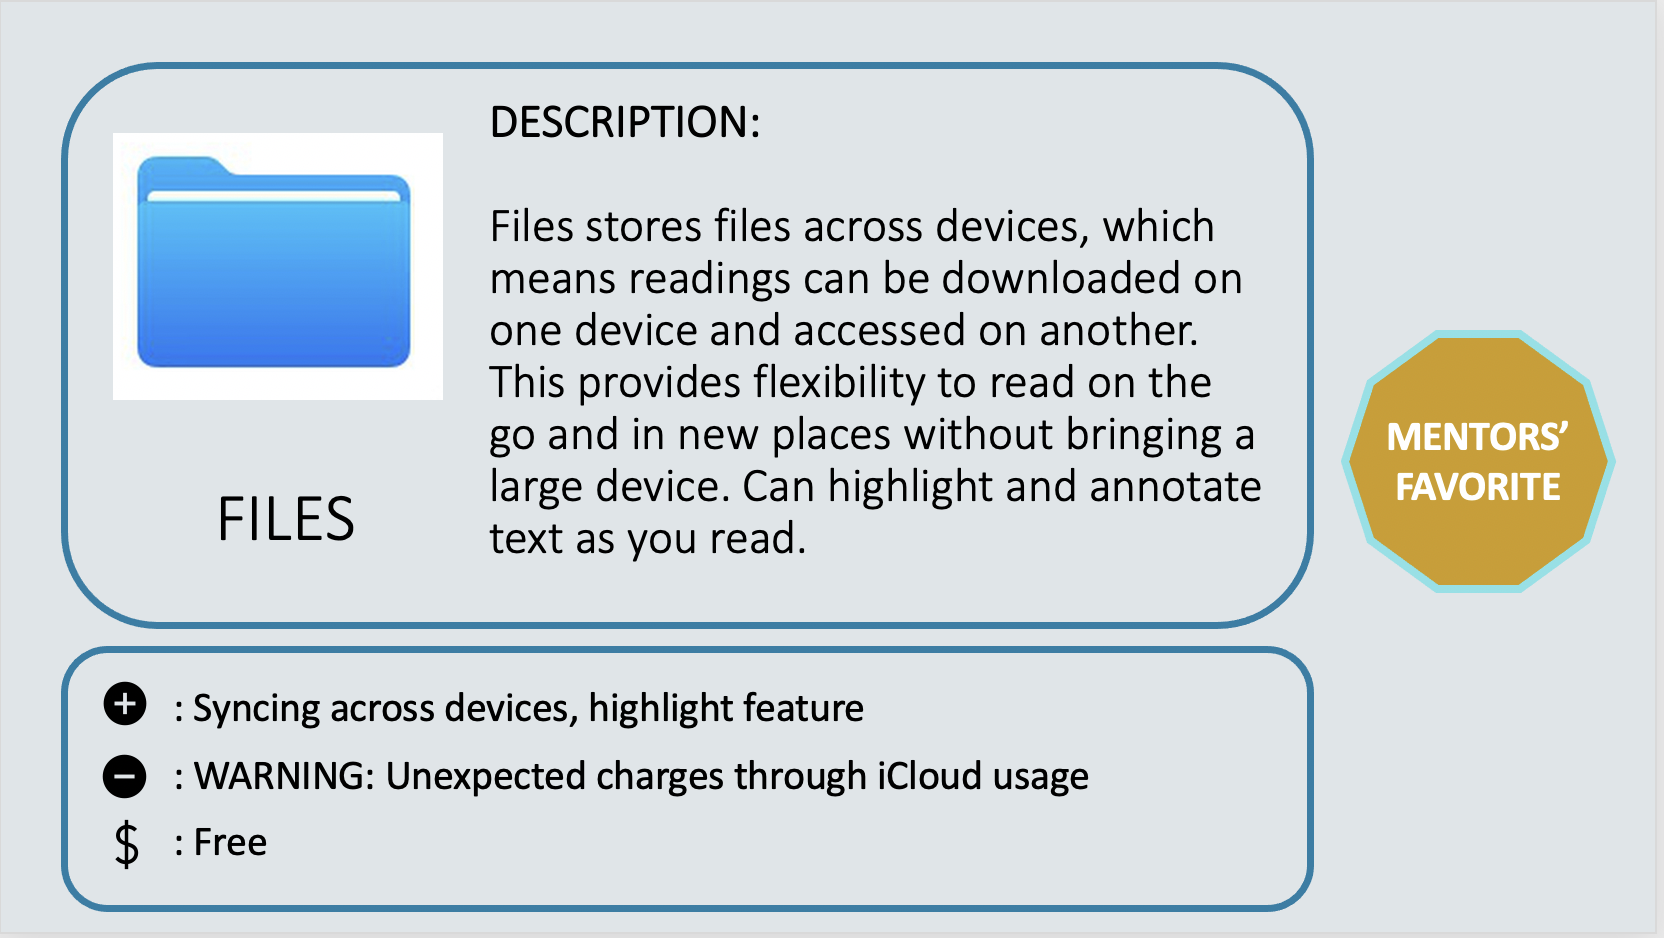 FILES – Mentor’s favorite - Files stores files across devices, which means readings can be downloaded on one device and accessed on another. This provides flexibility to read on the go and in new places without bringing a large device. Can highlight and annotate text as you read. Positive: Syncing across devices, highlight feature. Negative: WARNING: Unexpected charges through iCloud usage. Cost: Free.